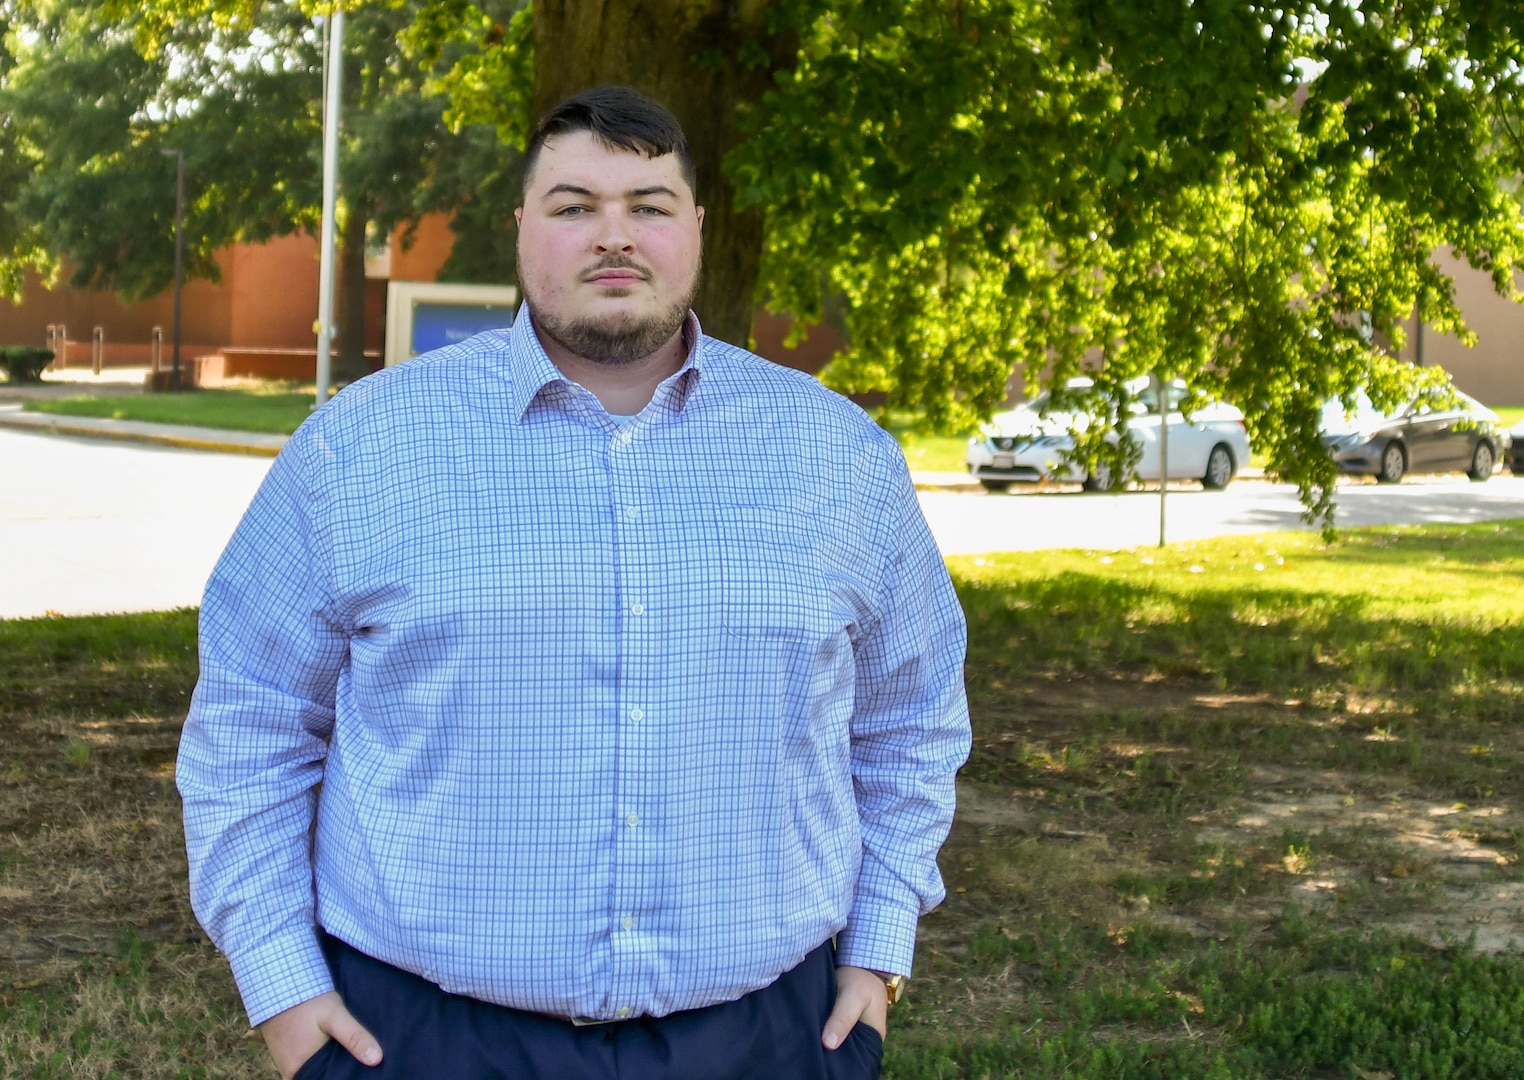 IMAGE: Naval Surface Warfare Center Dahlgren Division employee Thomas Shifflett has risen from an intern to the Topside Engineering – Digital Engineering Lead in the Electromagnetic and Sensor Systems Department in a little more than two years.